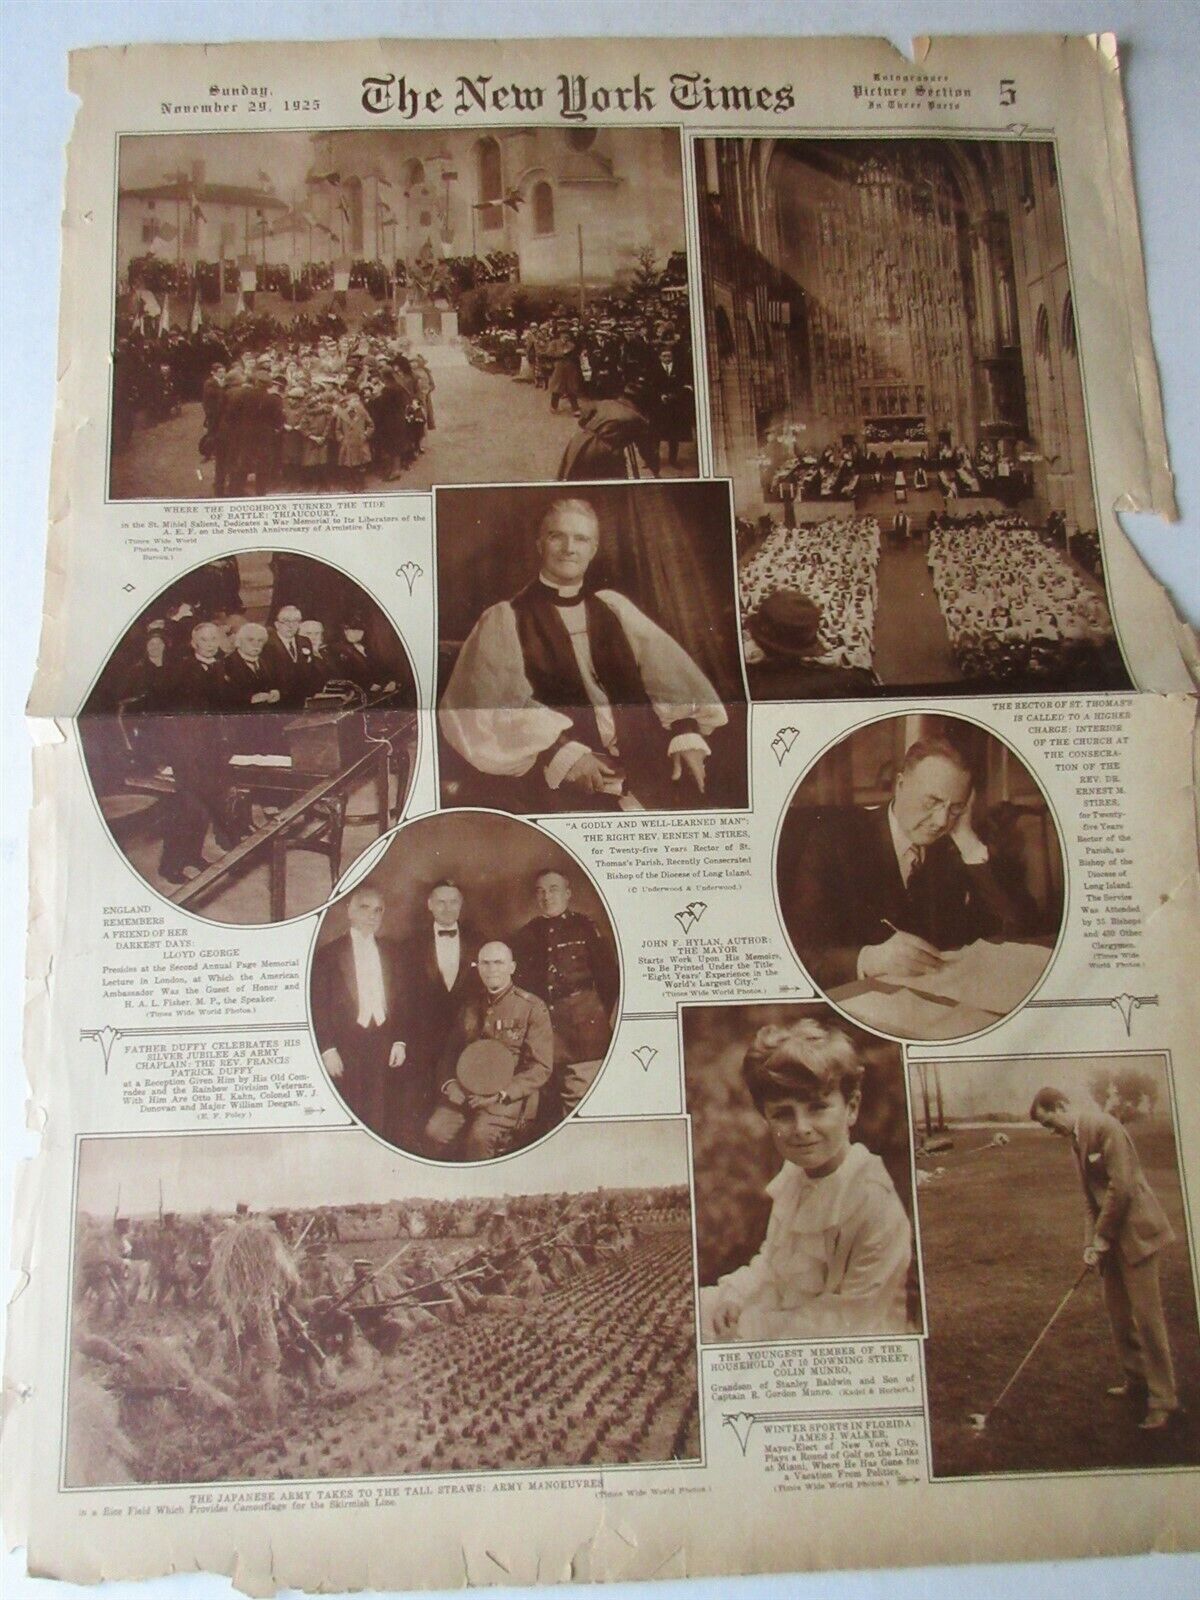 New York Times Nov 29, 1925 Rome welcomes Mussolini, Clark Griffith, Debutantes